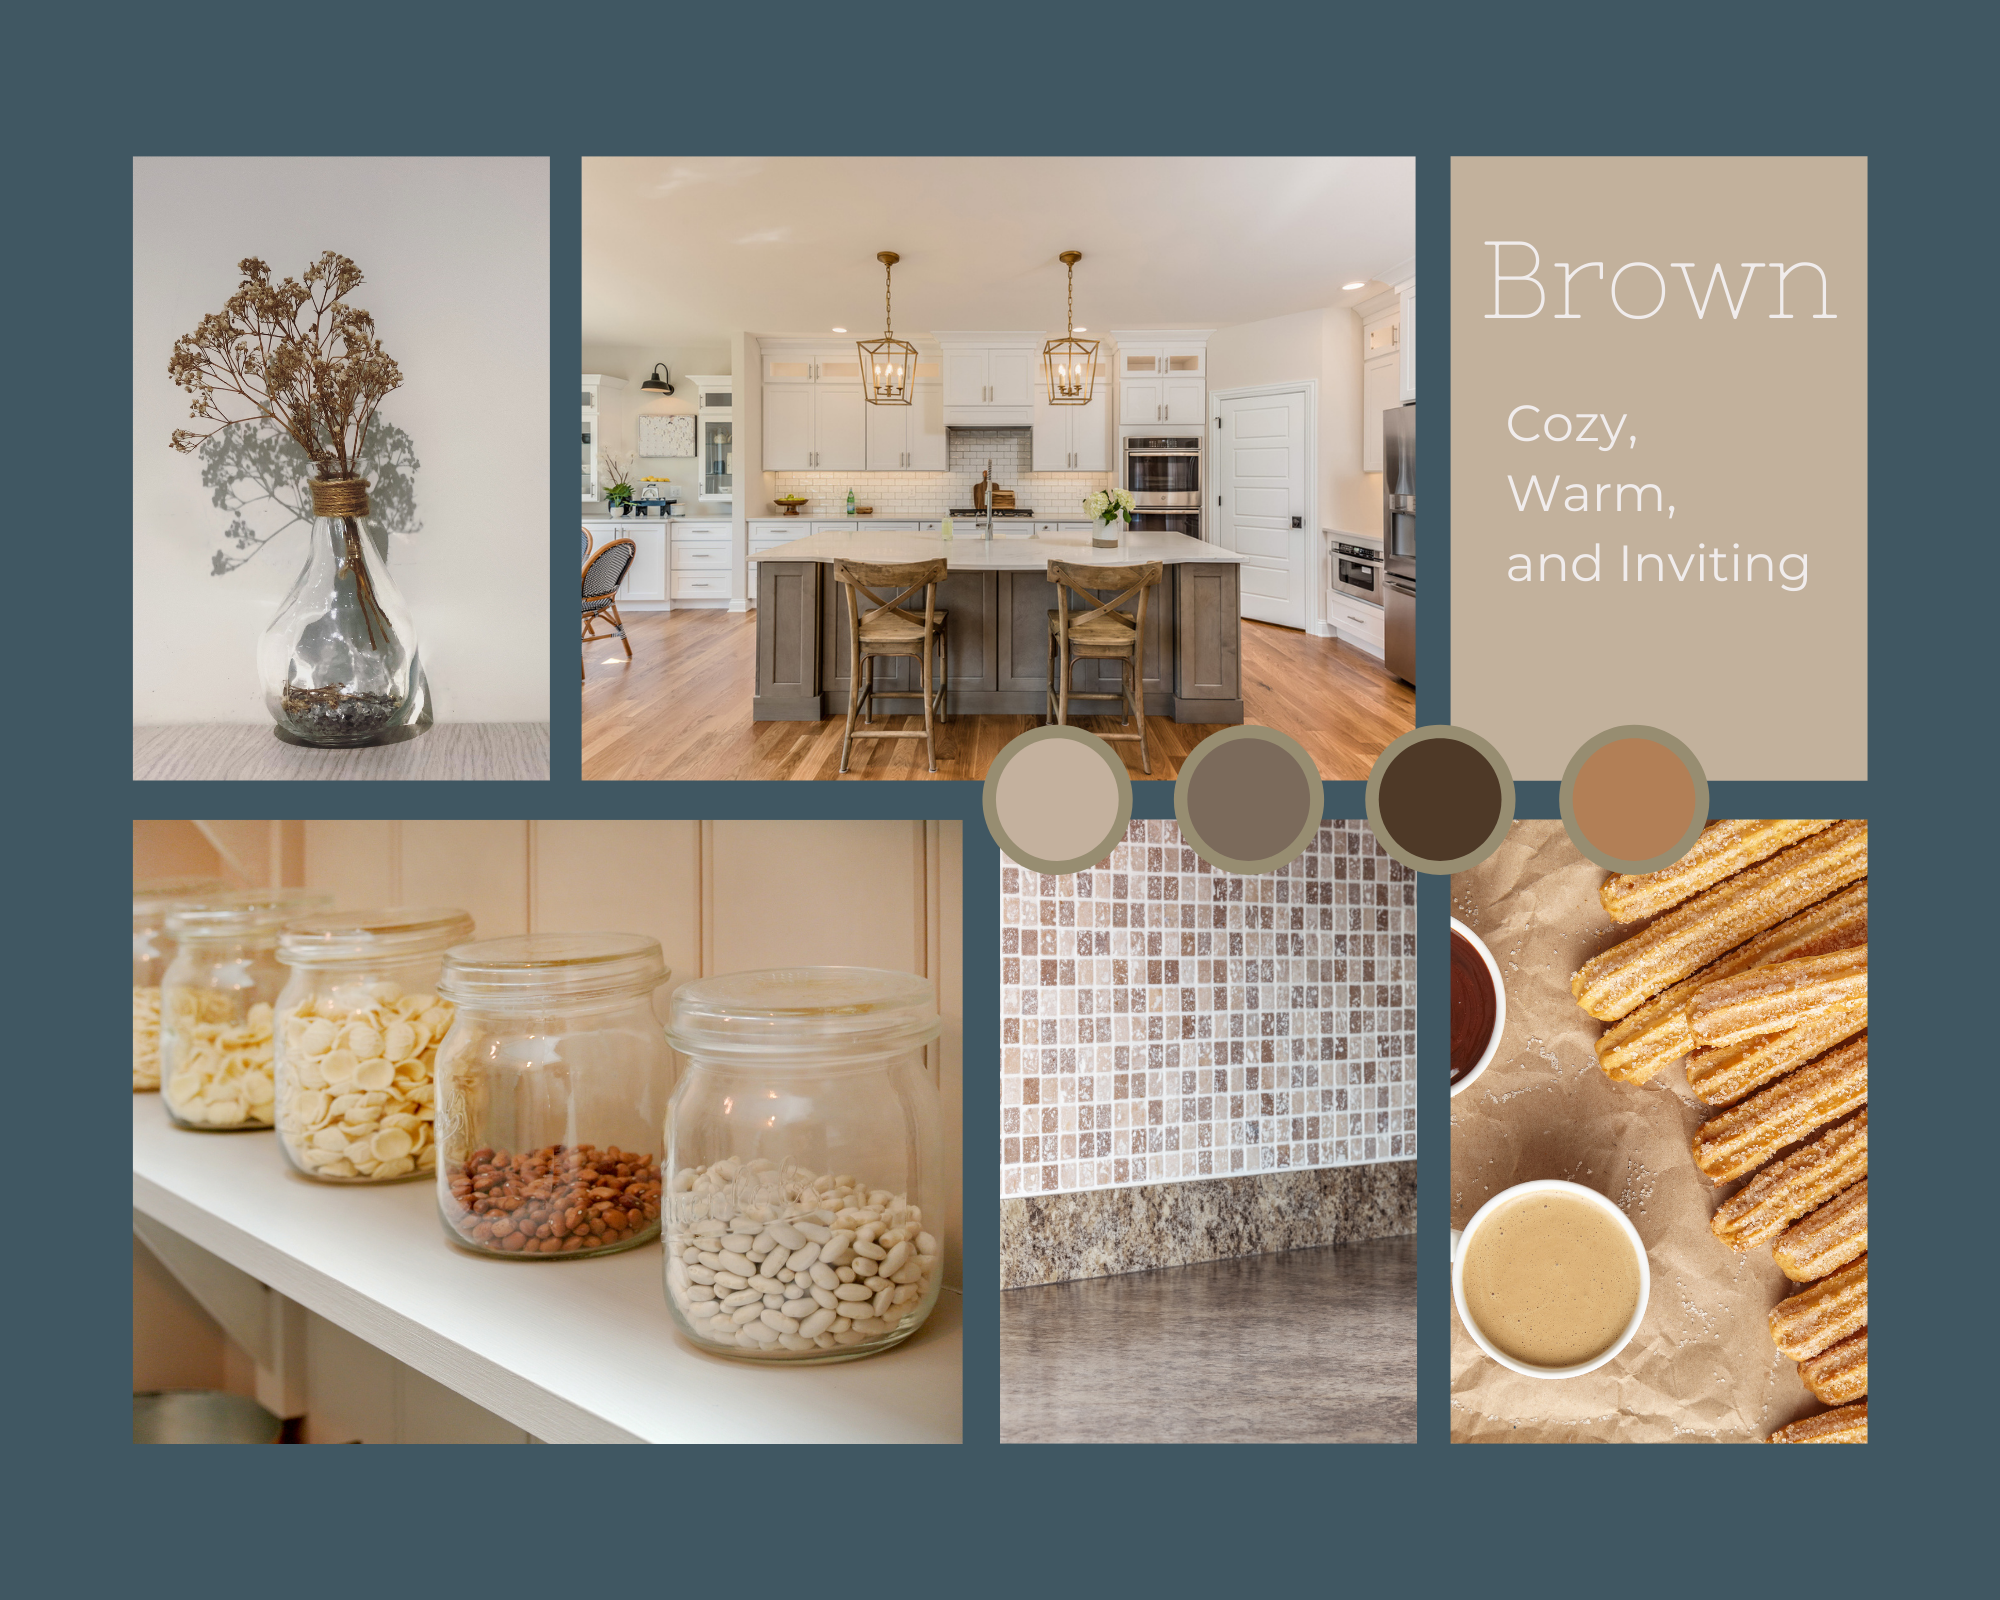 Brown – Cozy, Warm, and Inviting